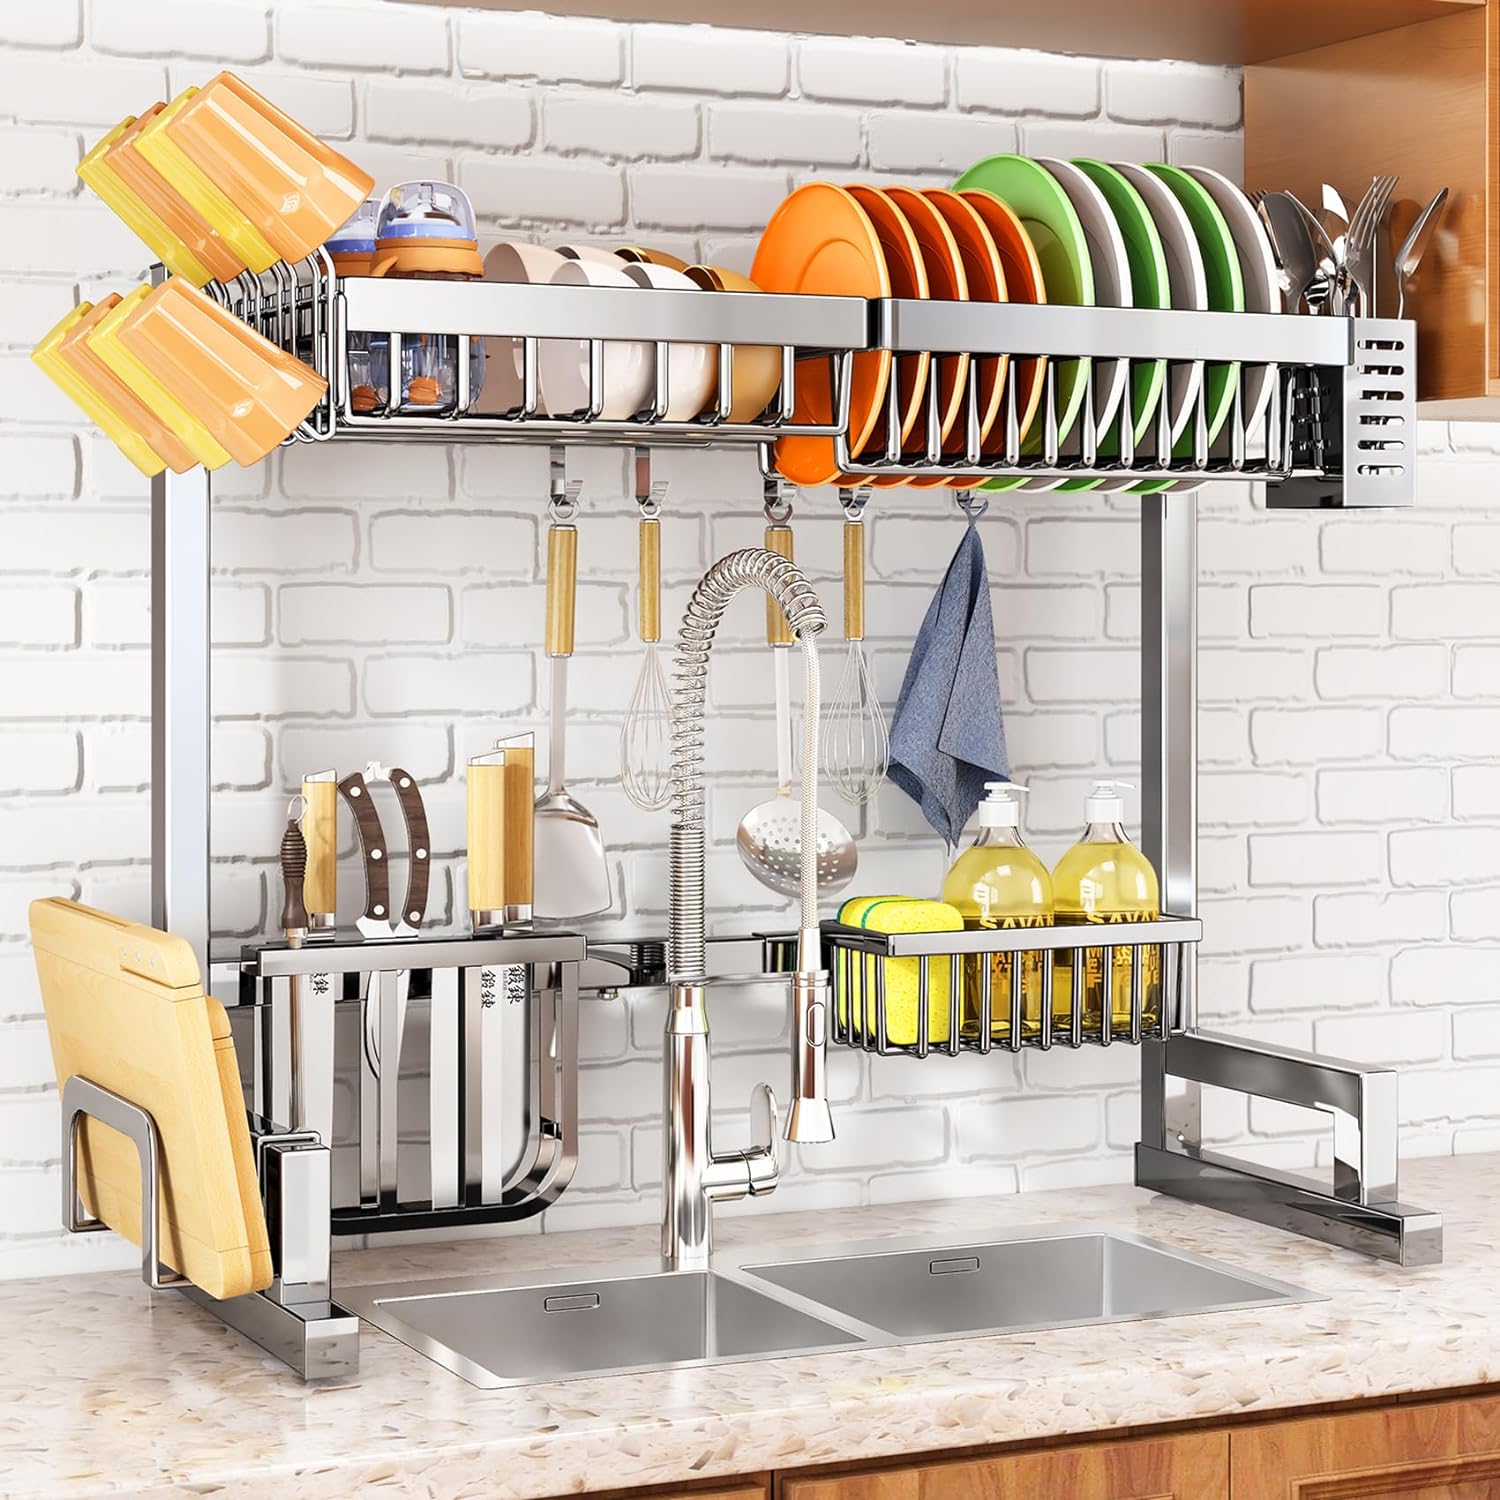 https://bigbigmart.com/wp-content/uploads/2023/10/Over-The-Sink-Dish-Drying-Rack-Full-Stainless-Steel-Adjustable-26.8-to-34.6-Large-Dish-Drying-Rack-for-Kitchen-Counter-with-Multiple-Baskets-Utensil-Sponge-Holder-Sink-Caddy-2-Tier-Silver.jpg